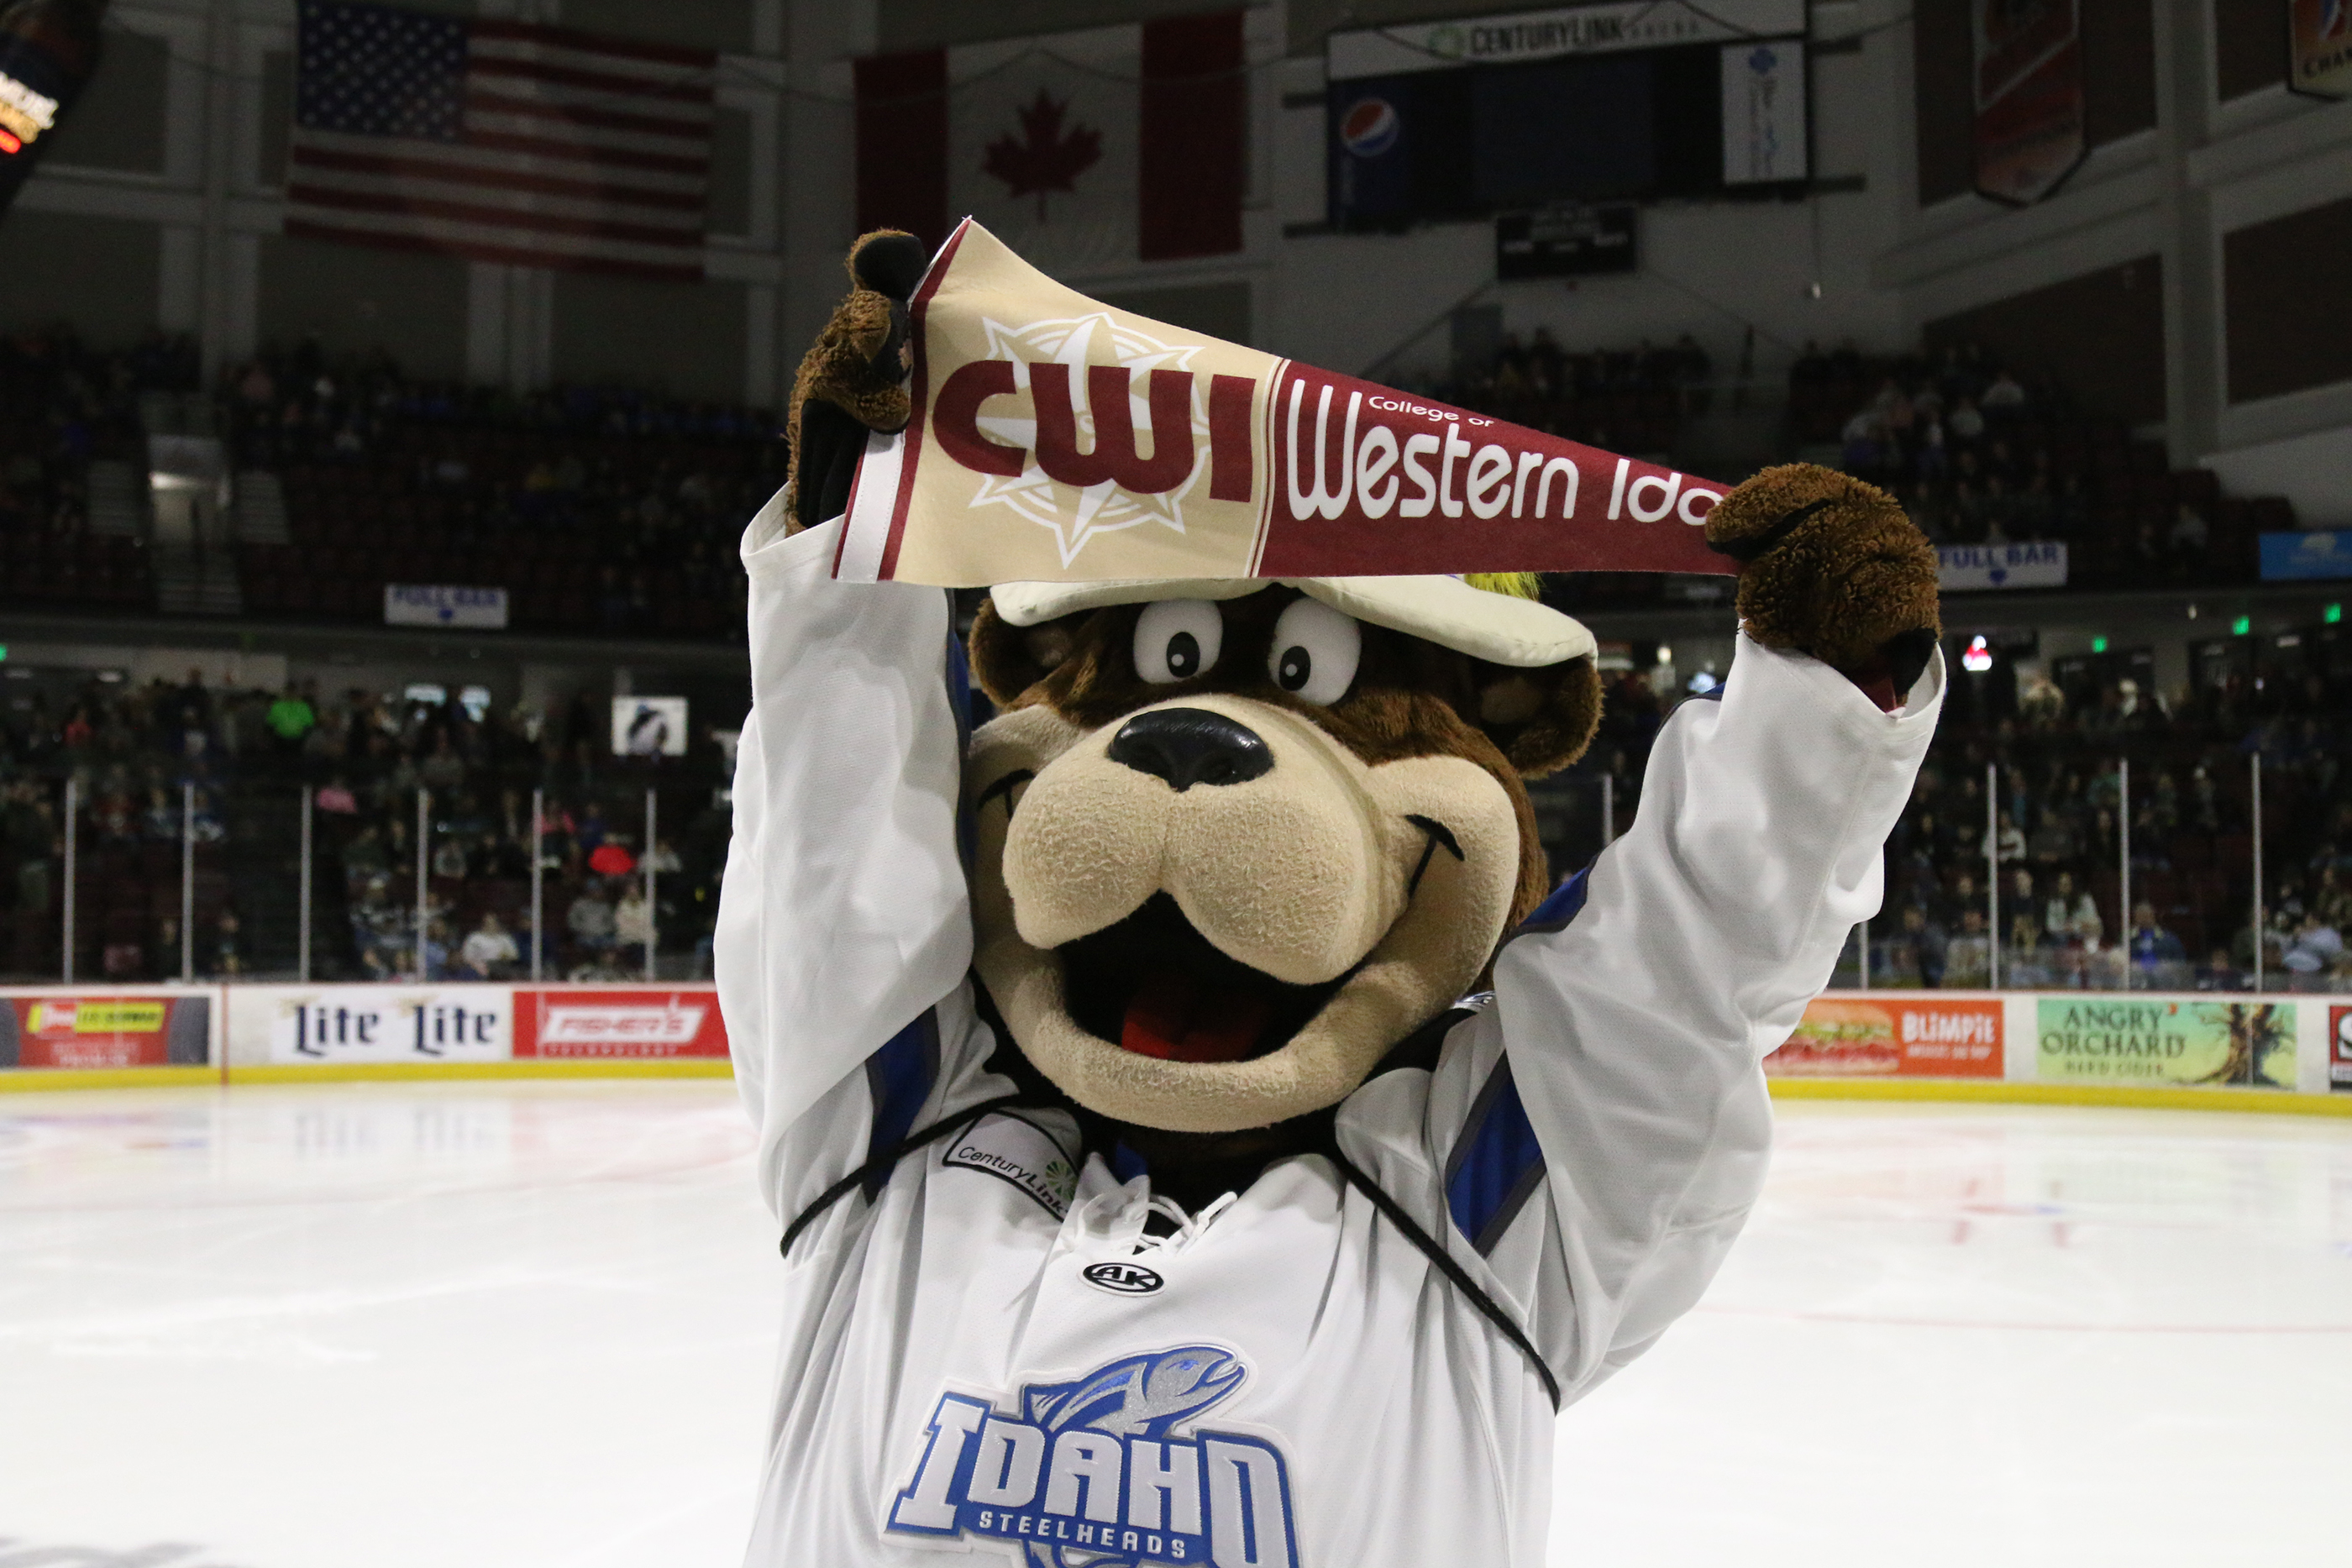 CWI Night at the Steelheads Sets a Record CWI